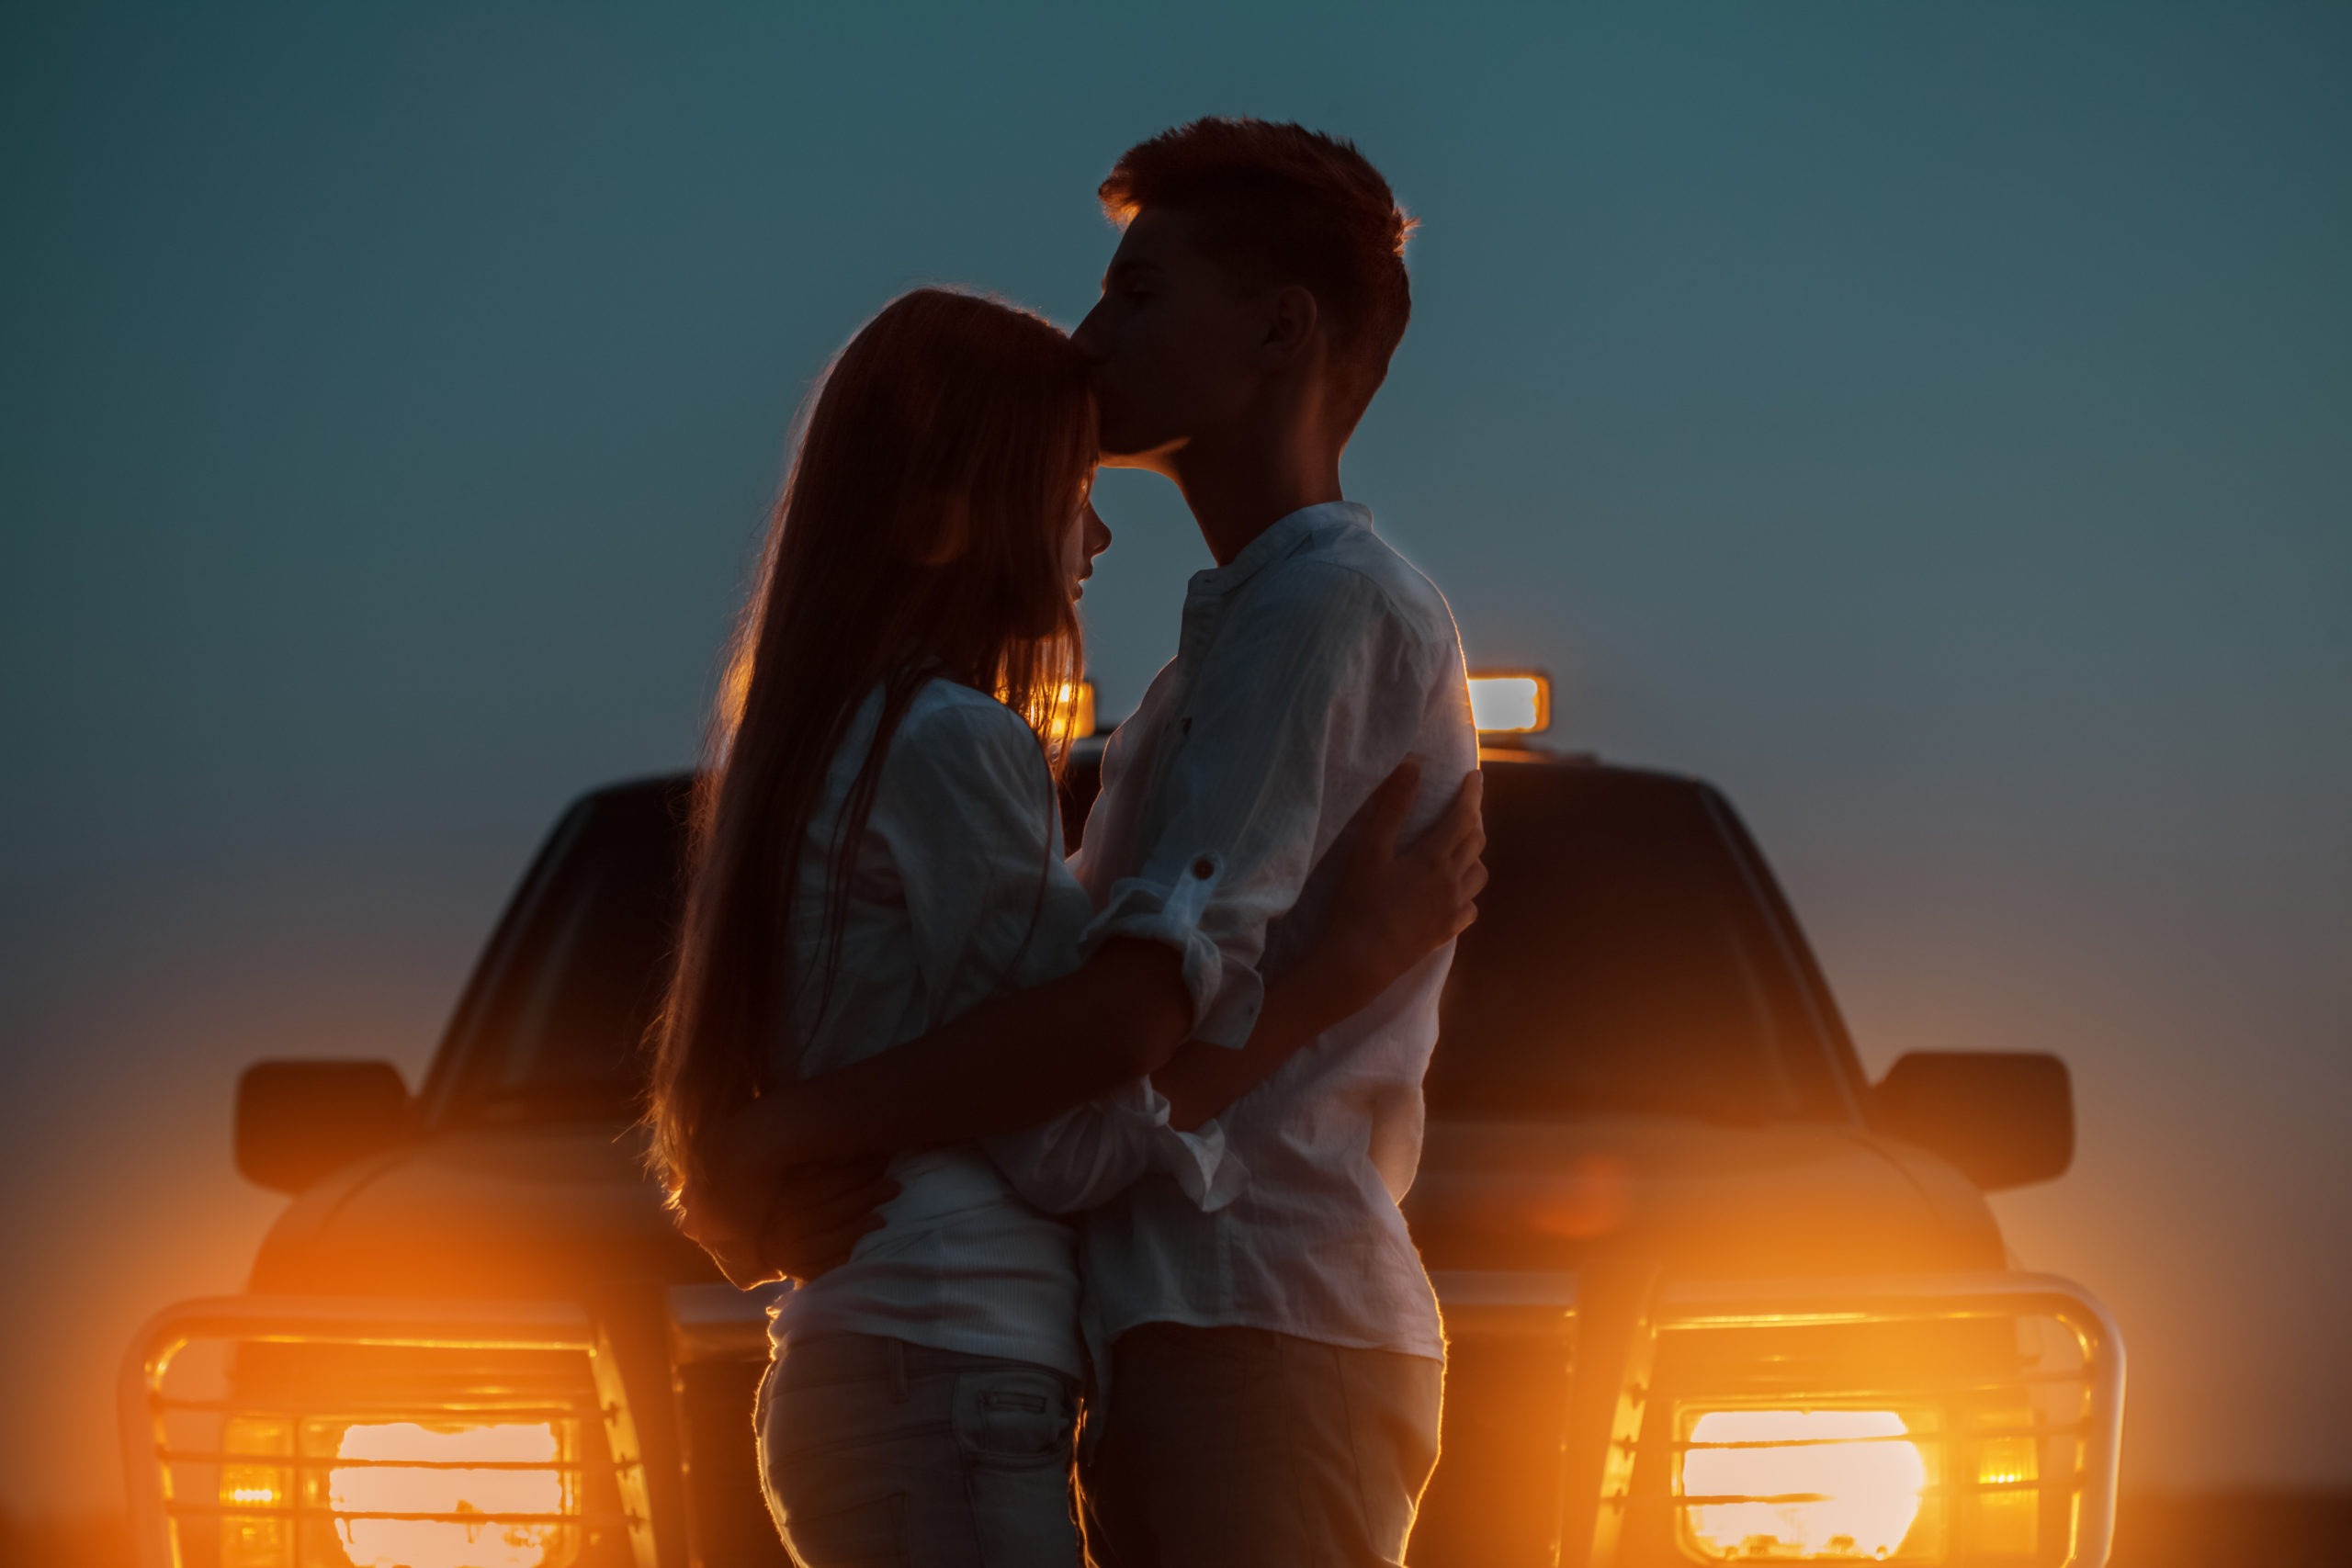 Silhouettes of young couple kissing goodbye in front of car headlights.